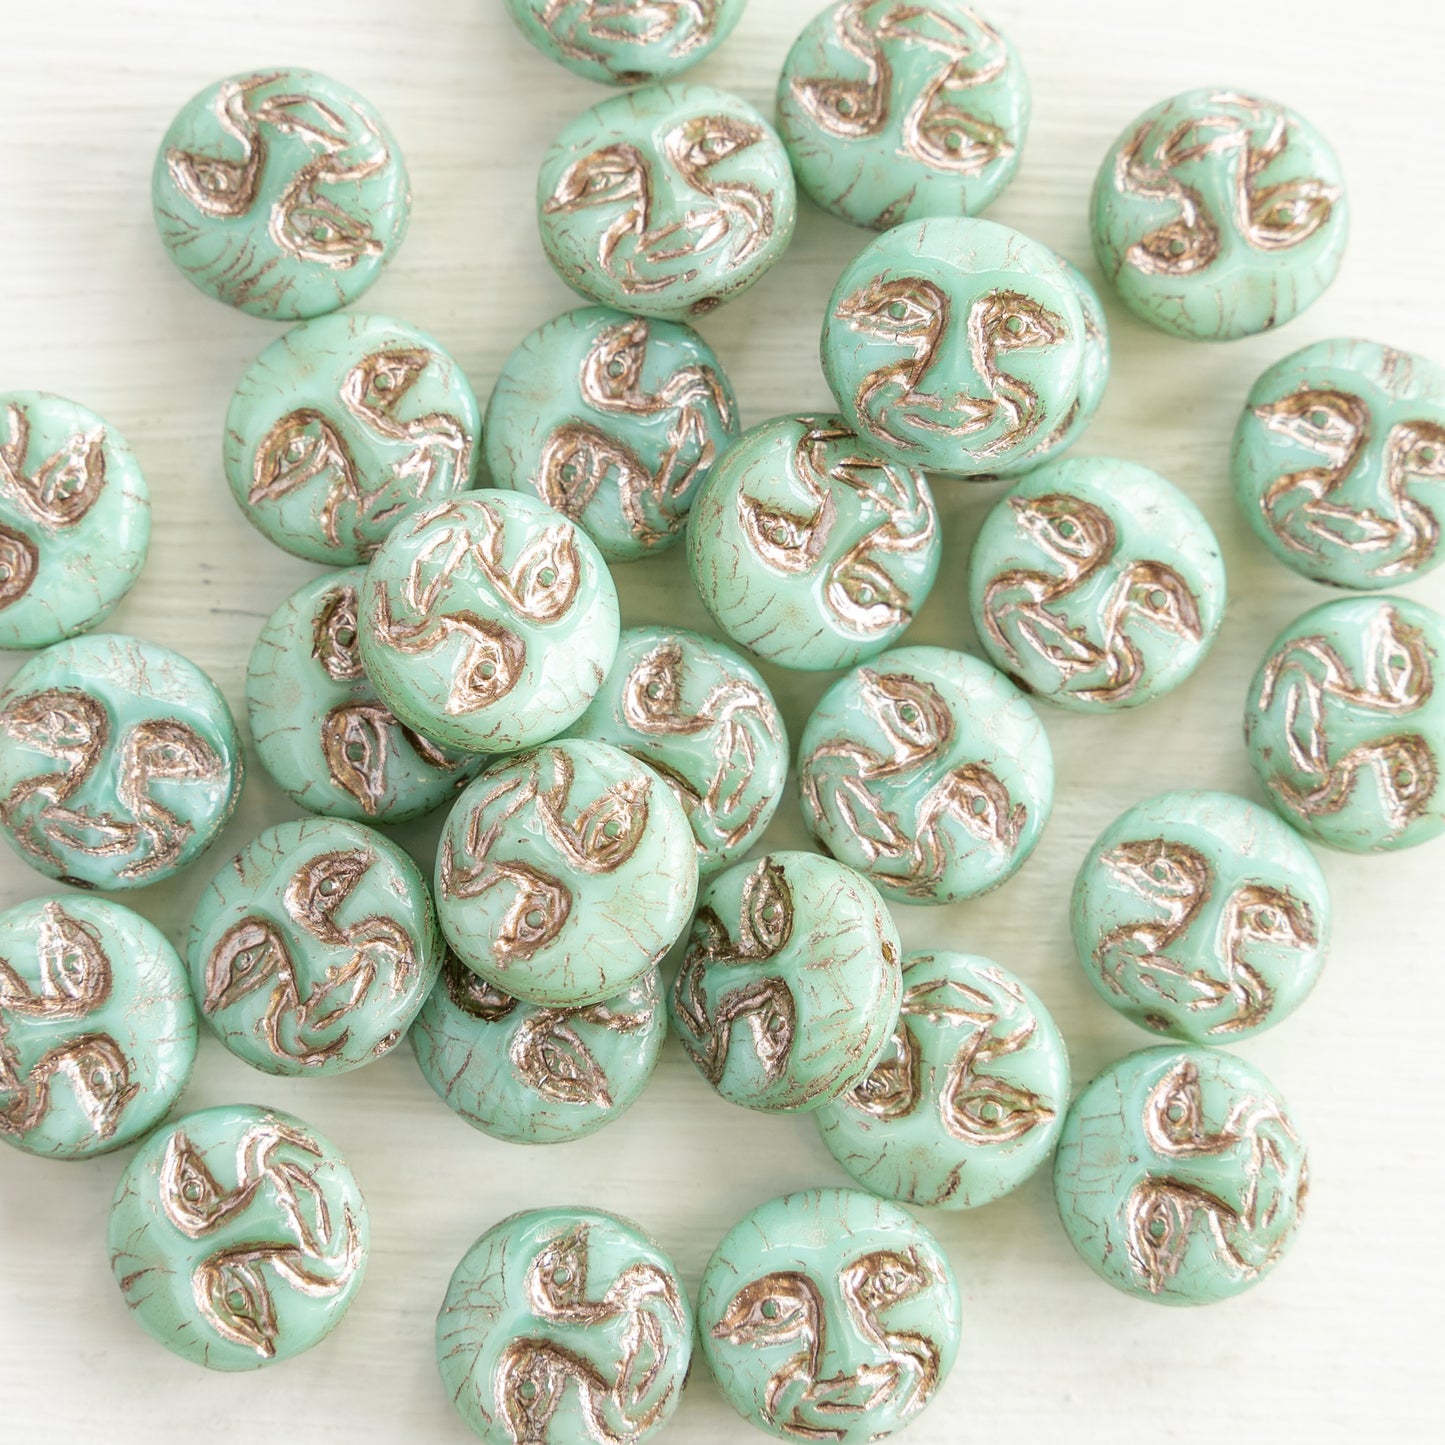 13mm Moon Face Beads - Turquoise with Bronze - 15 Beads